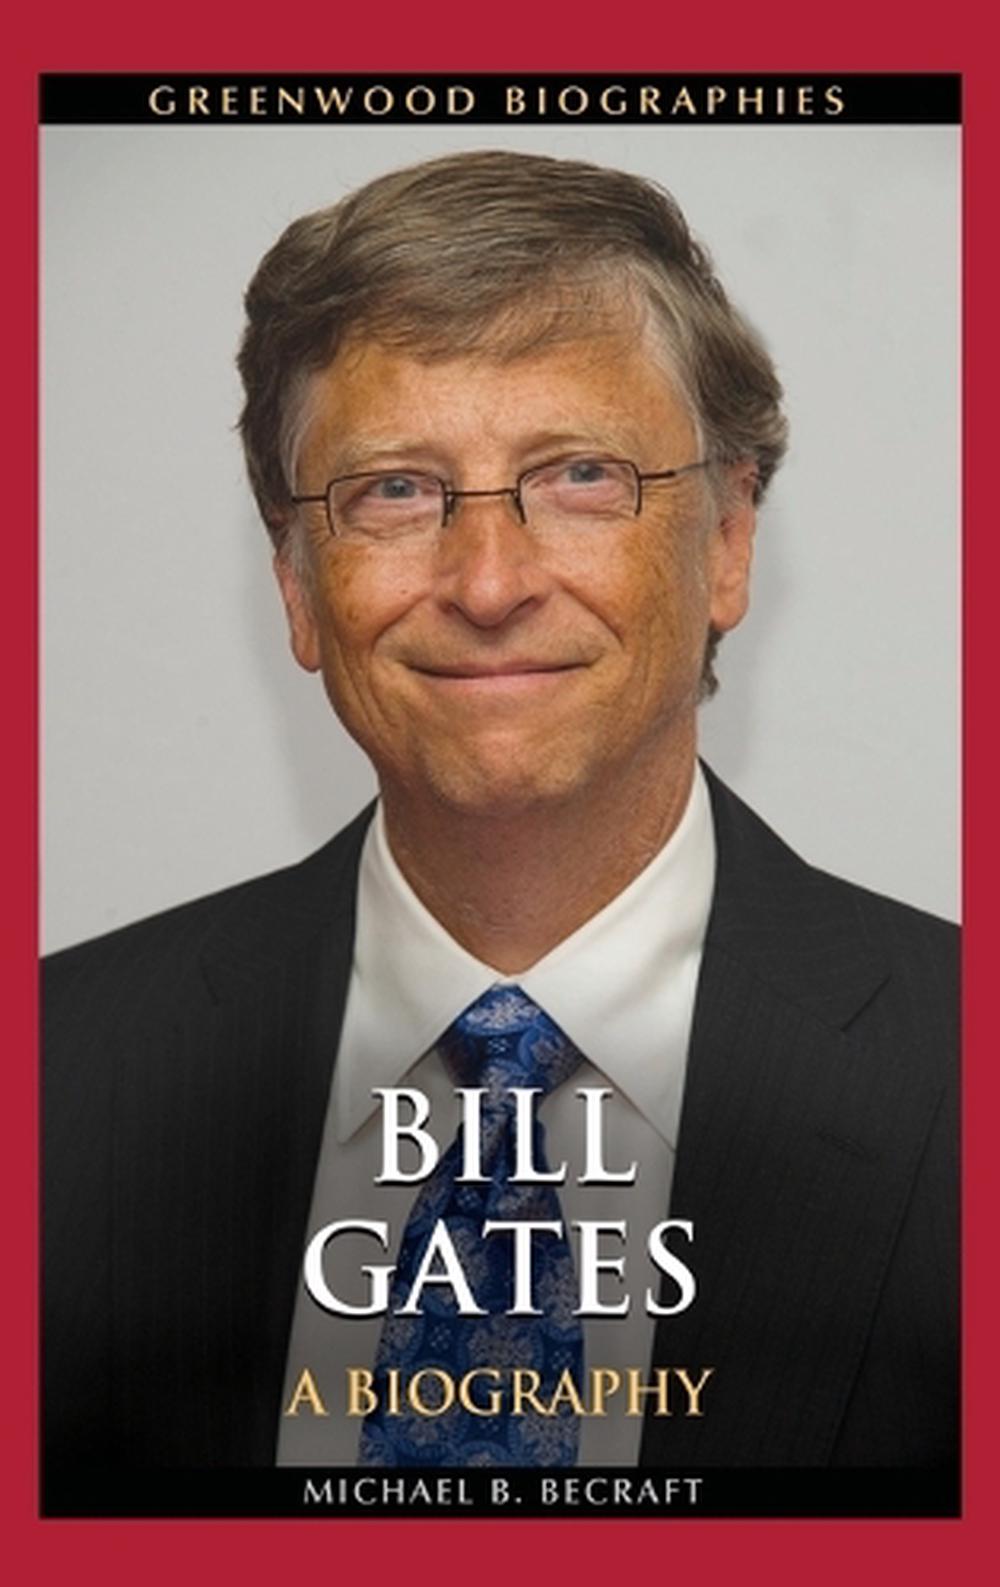 biography of bill gates in english